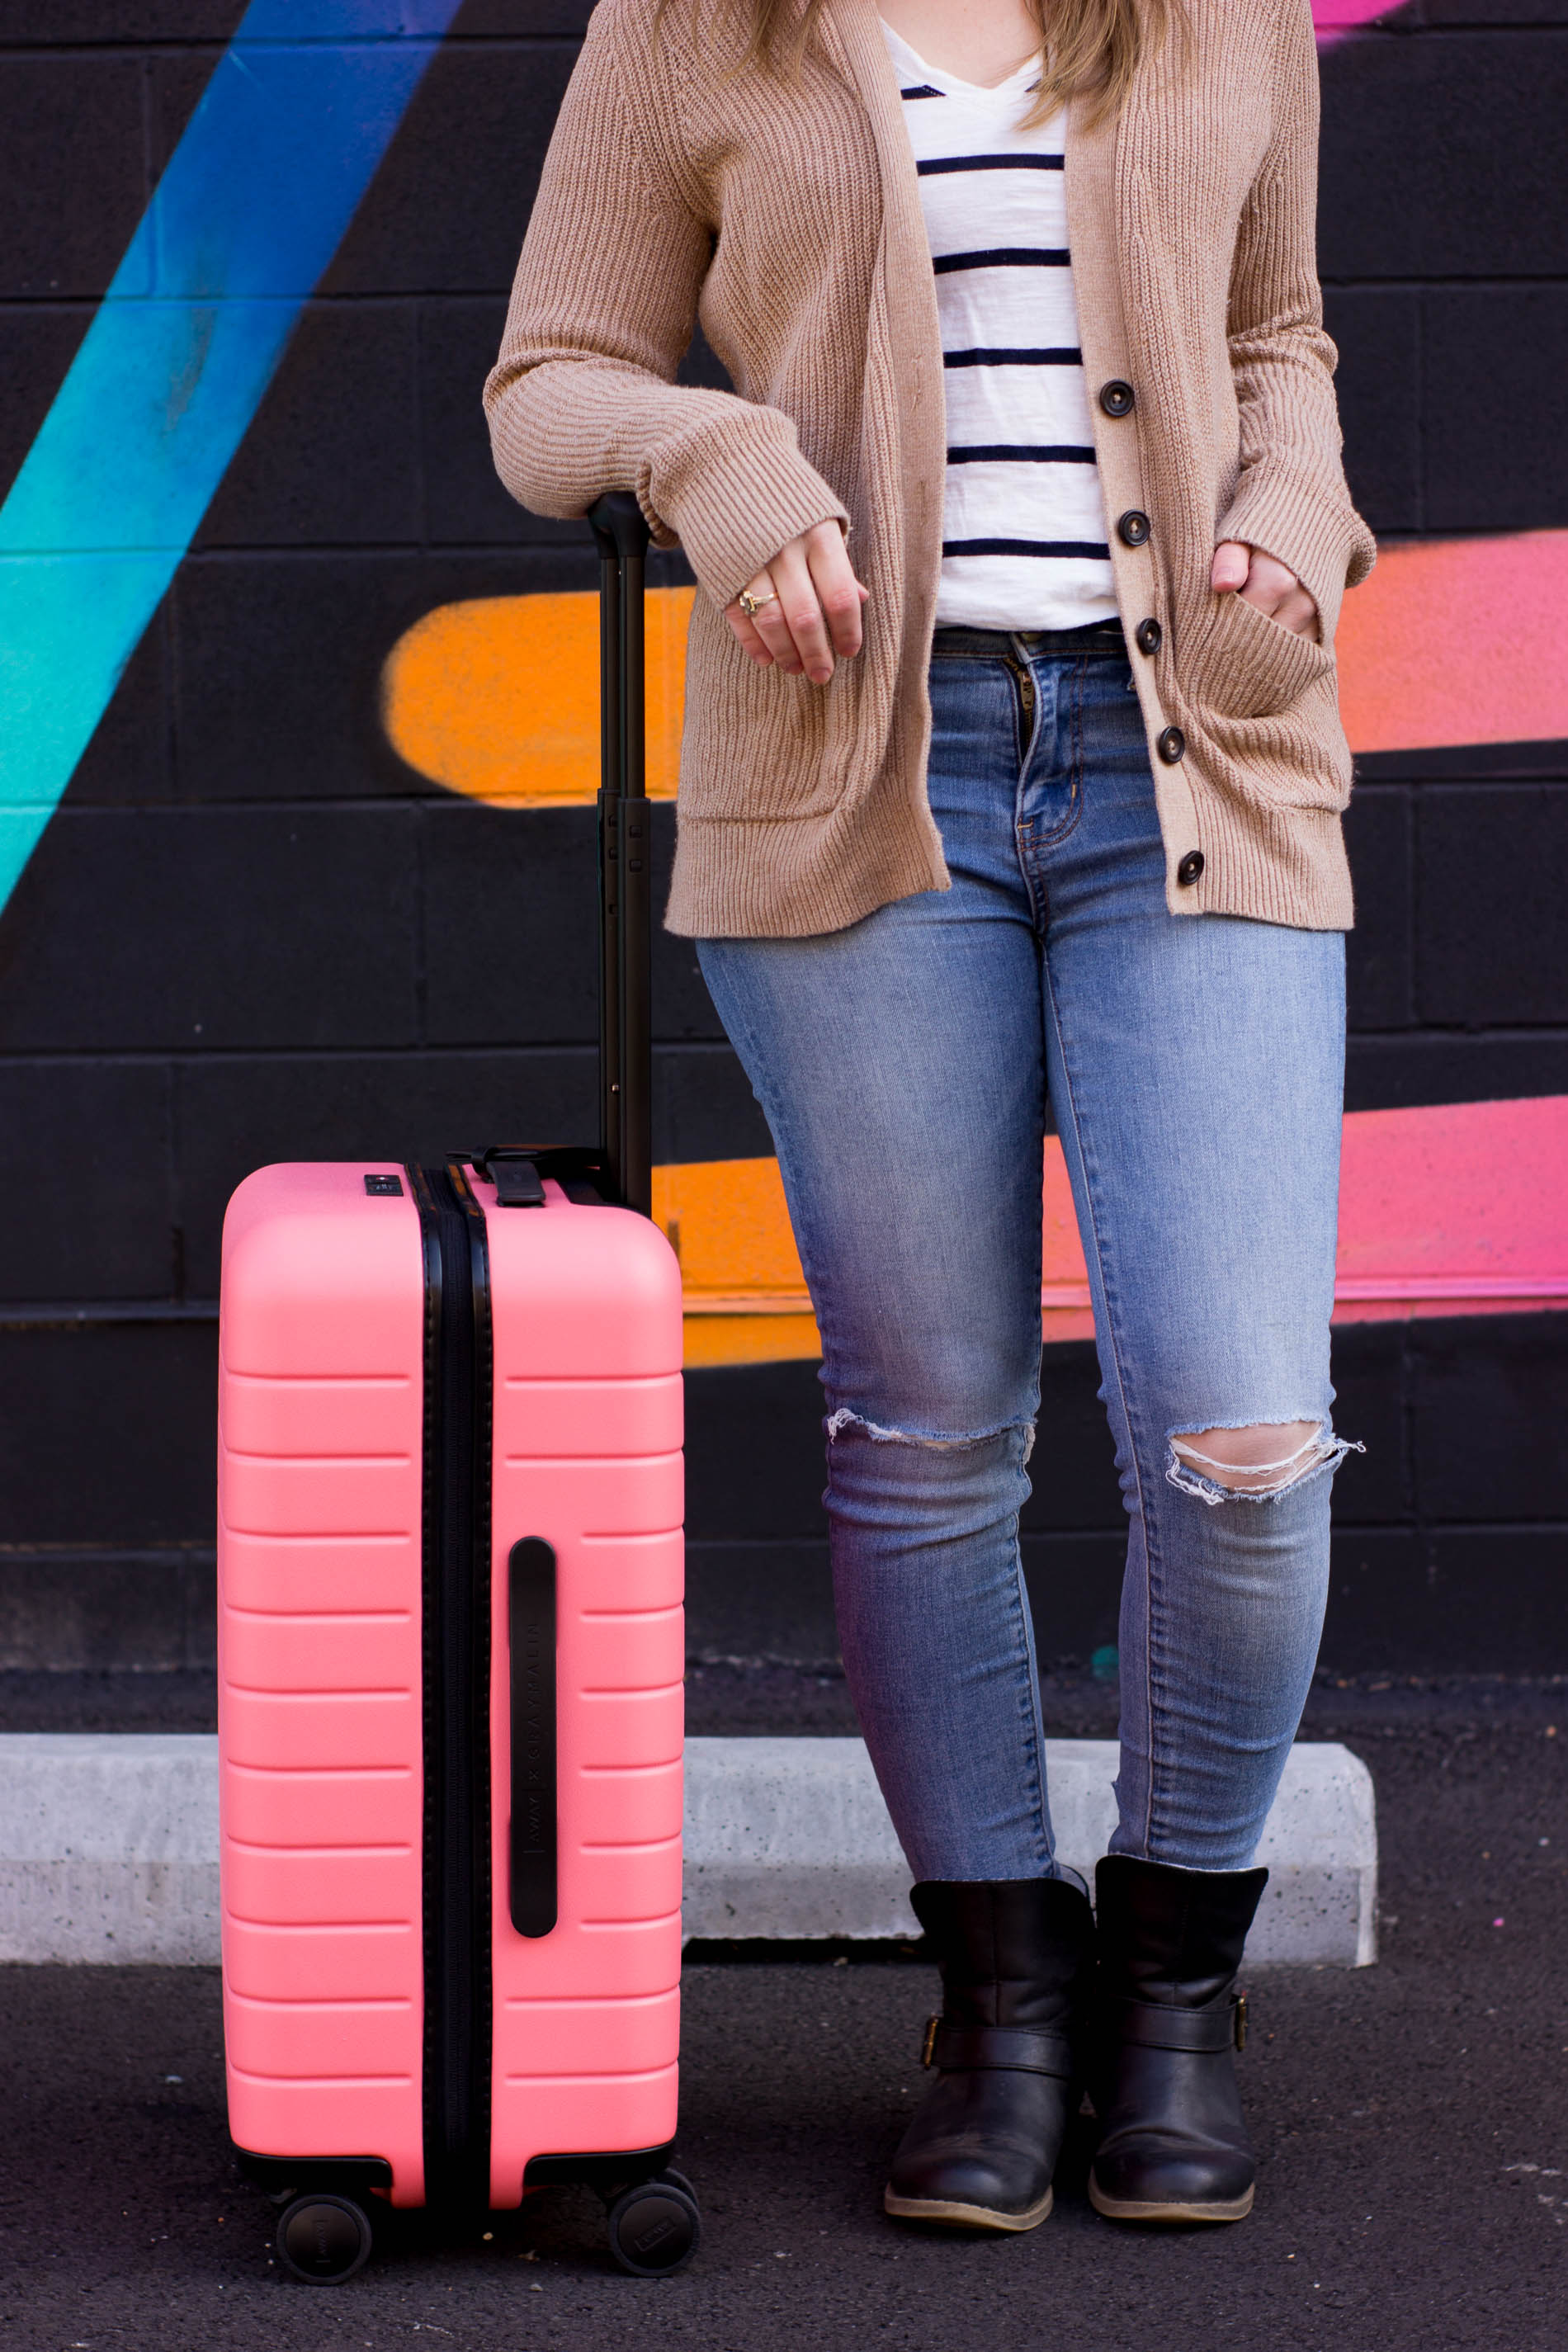 The Perfect Travel Outfit | Something Good, @danaerinw , away x gray malin, the bigger carry on, 